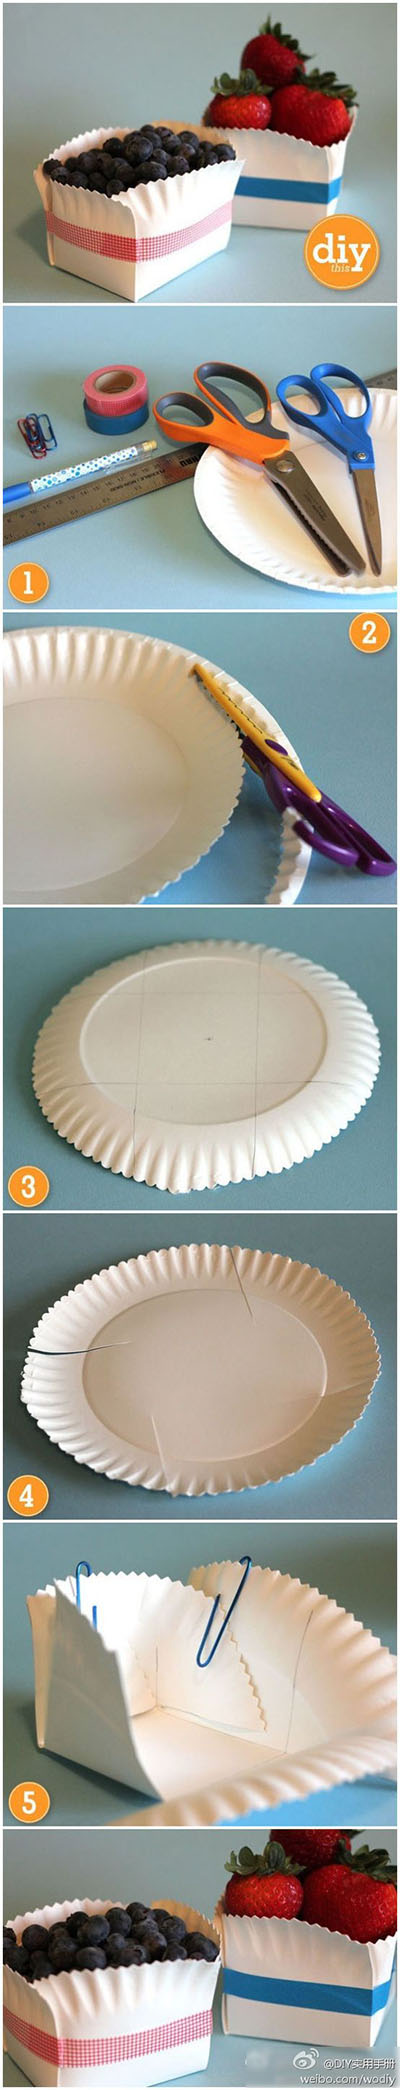 11 Make a gift box with a paper plate 6d673344ee